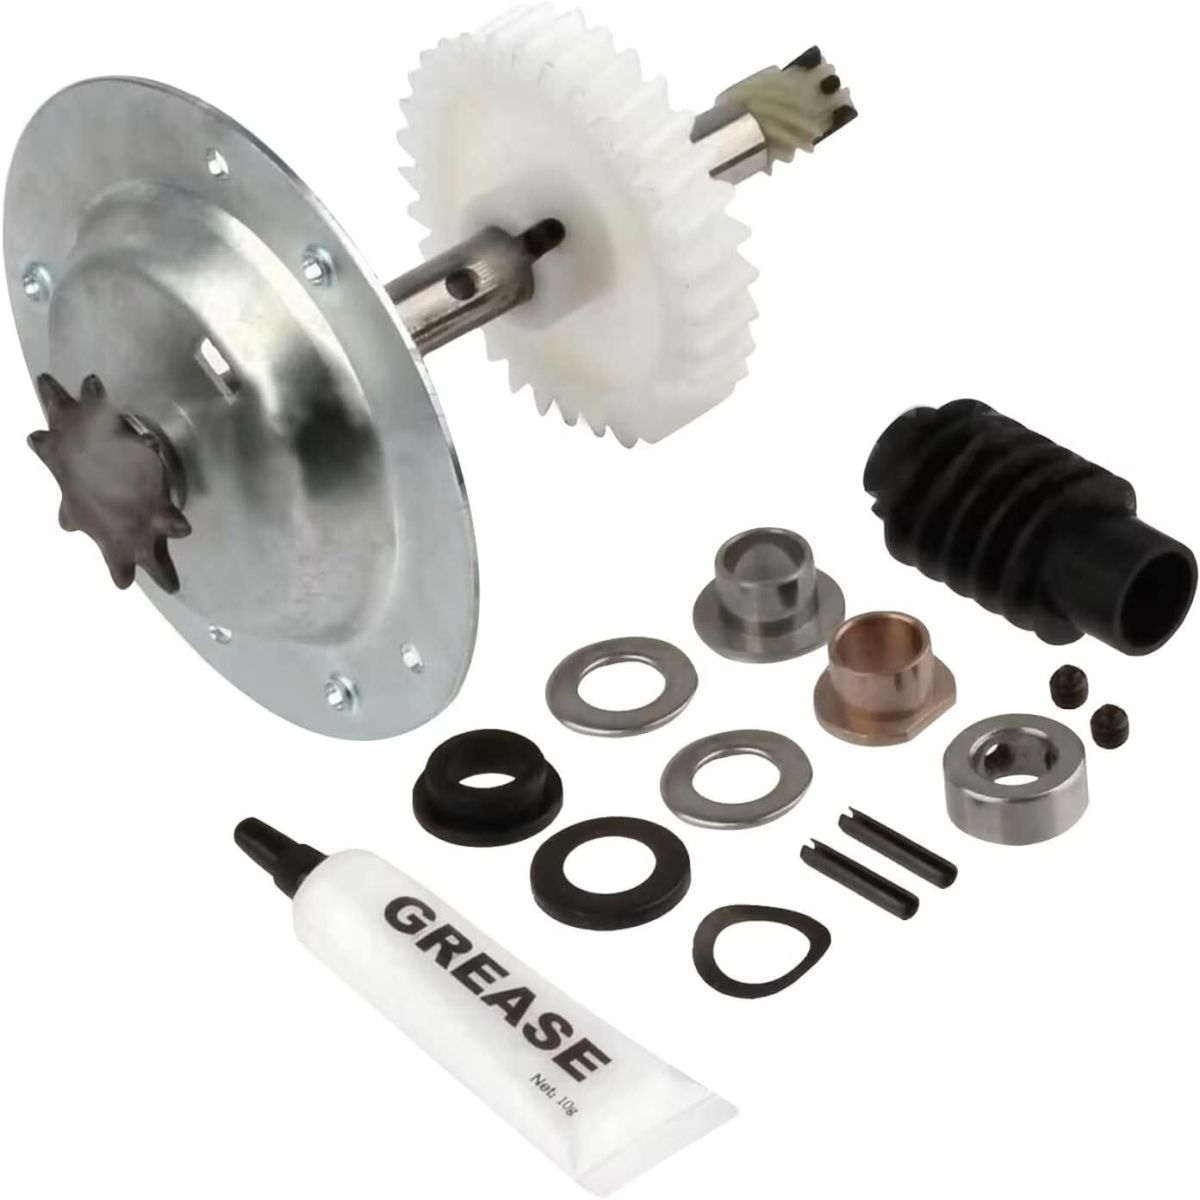 41C4220A Replacement for Liftmaster Gear and Sprocket Kit Fits for Chamberlain Chain Drive Models